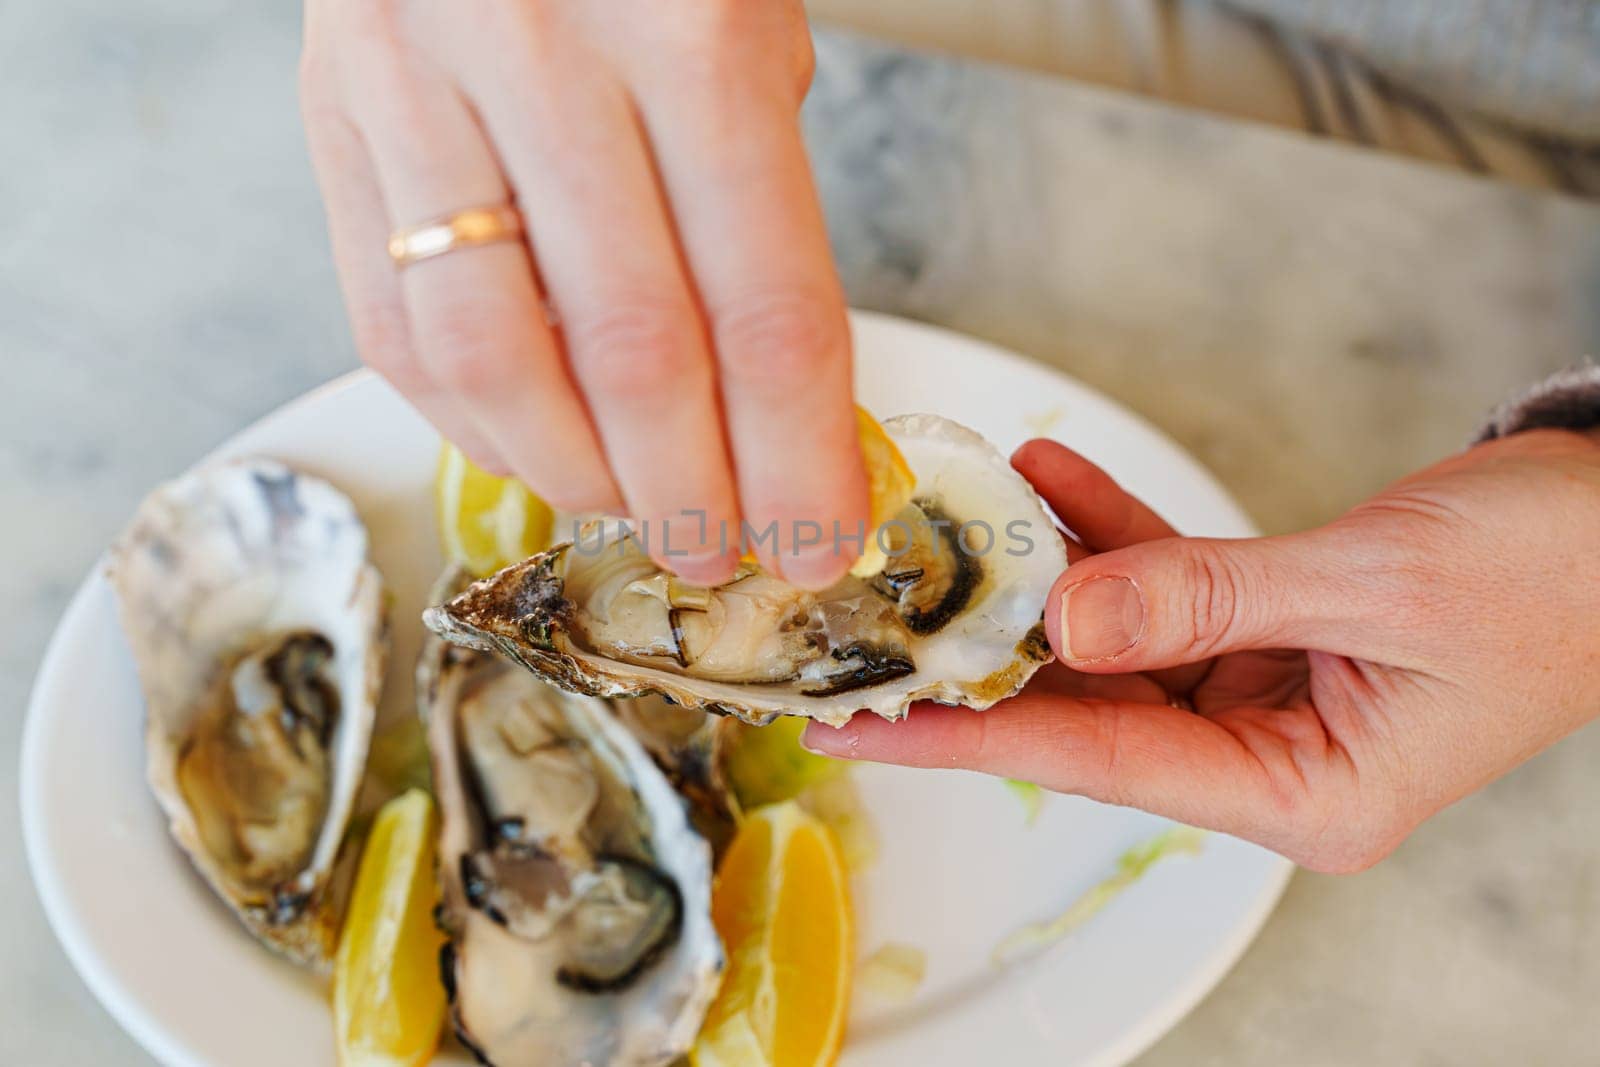 Young woman savoring a gourmet delicacy while dining outdoors, oysters and lemons arranged on a plate with silver utensils